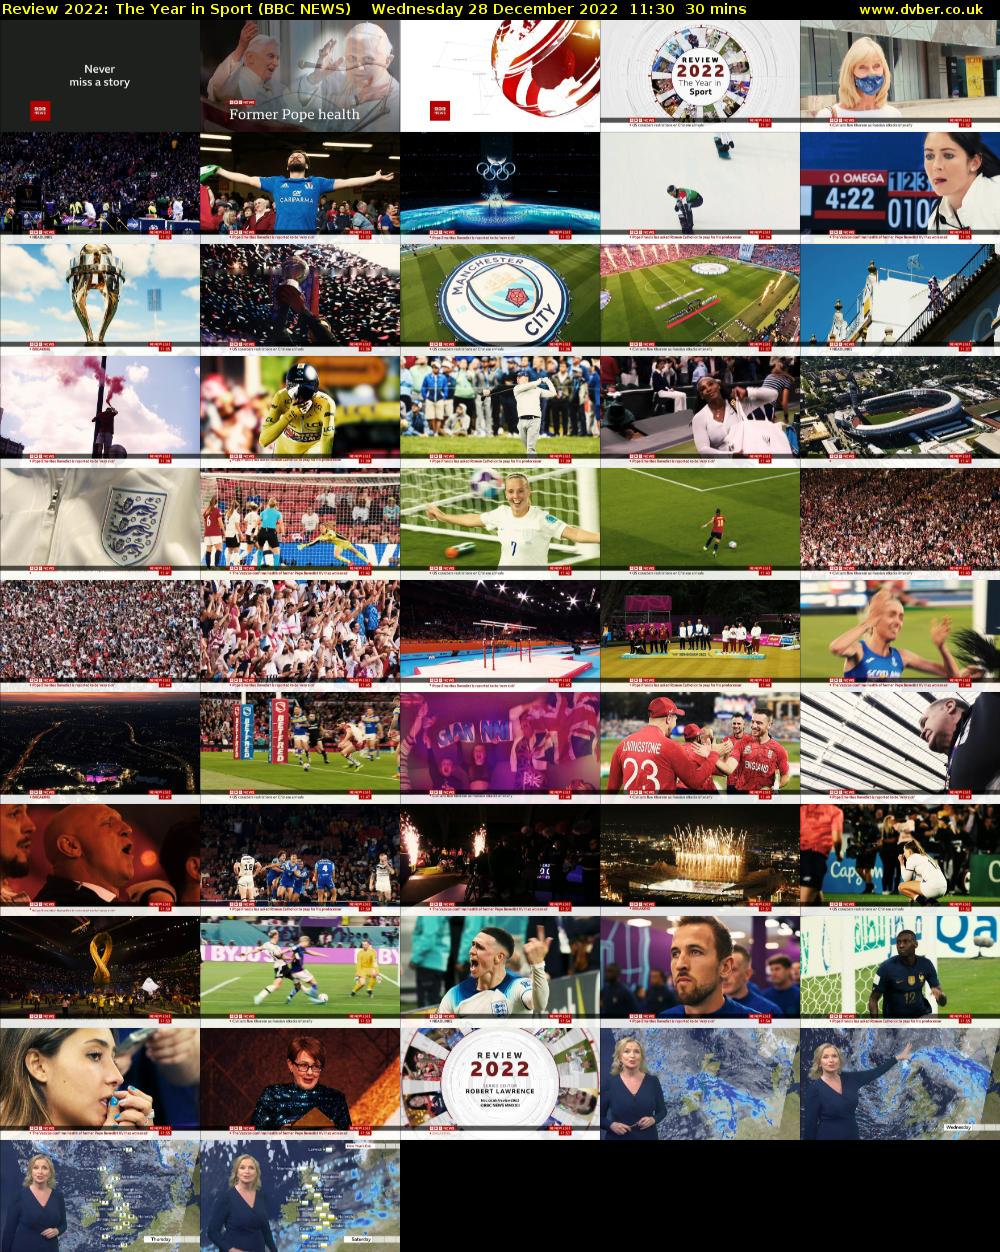 Review 2022: The Year in Sport (BBC NEWS) Wednesday 28 December 2022 11:30 - 12:00